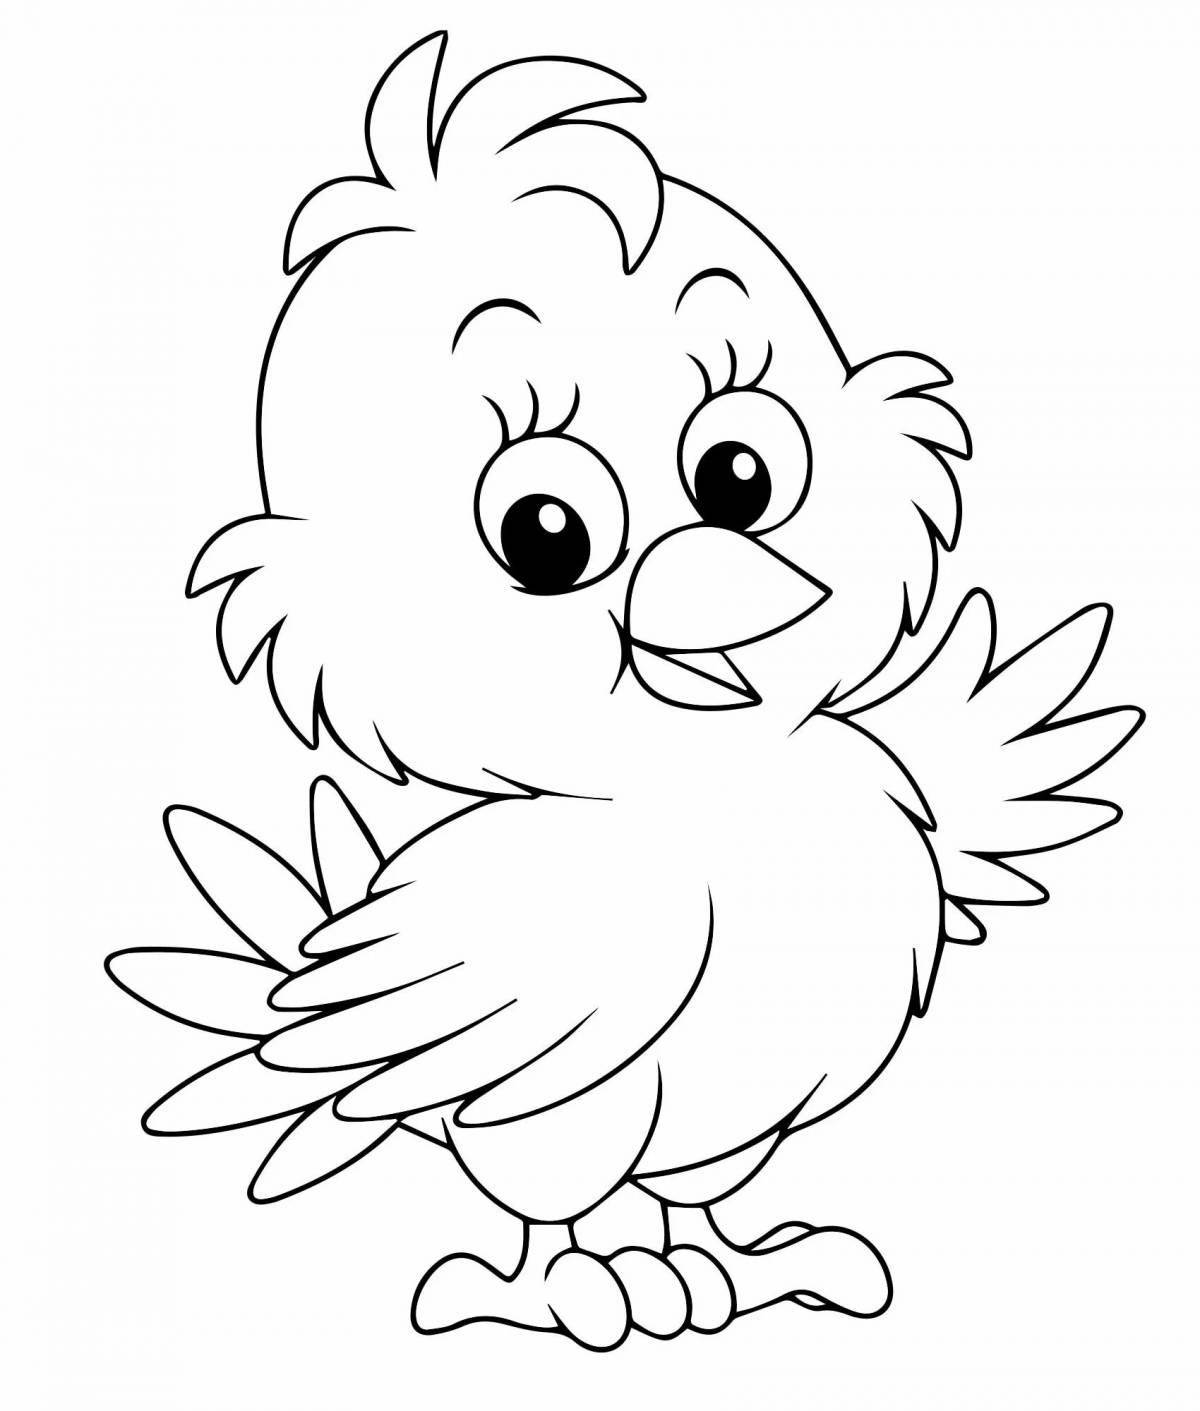 Animated chickens coloring for children 6-7 years old